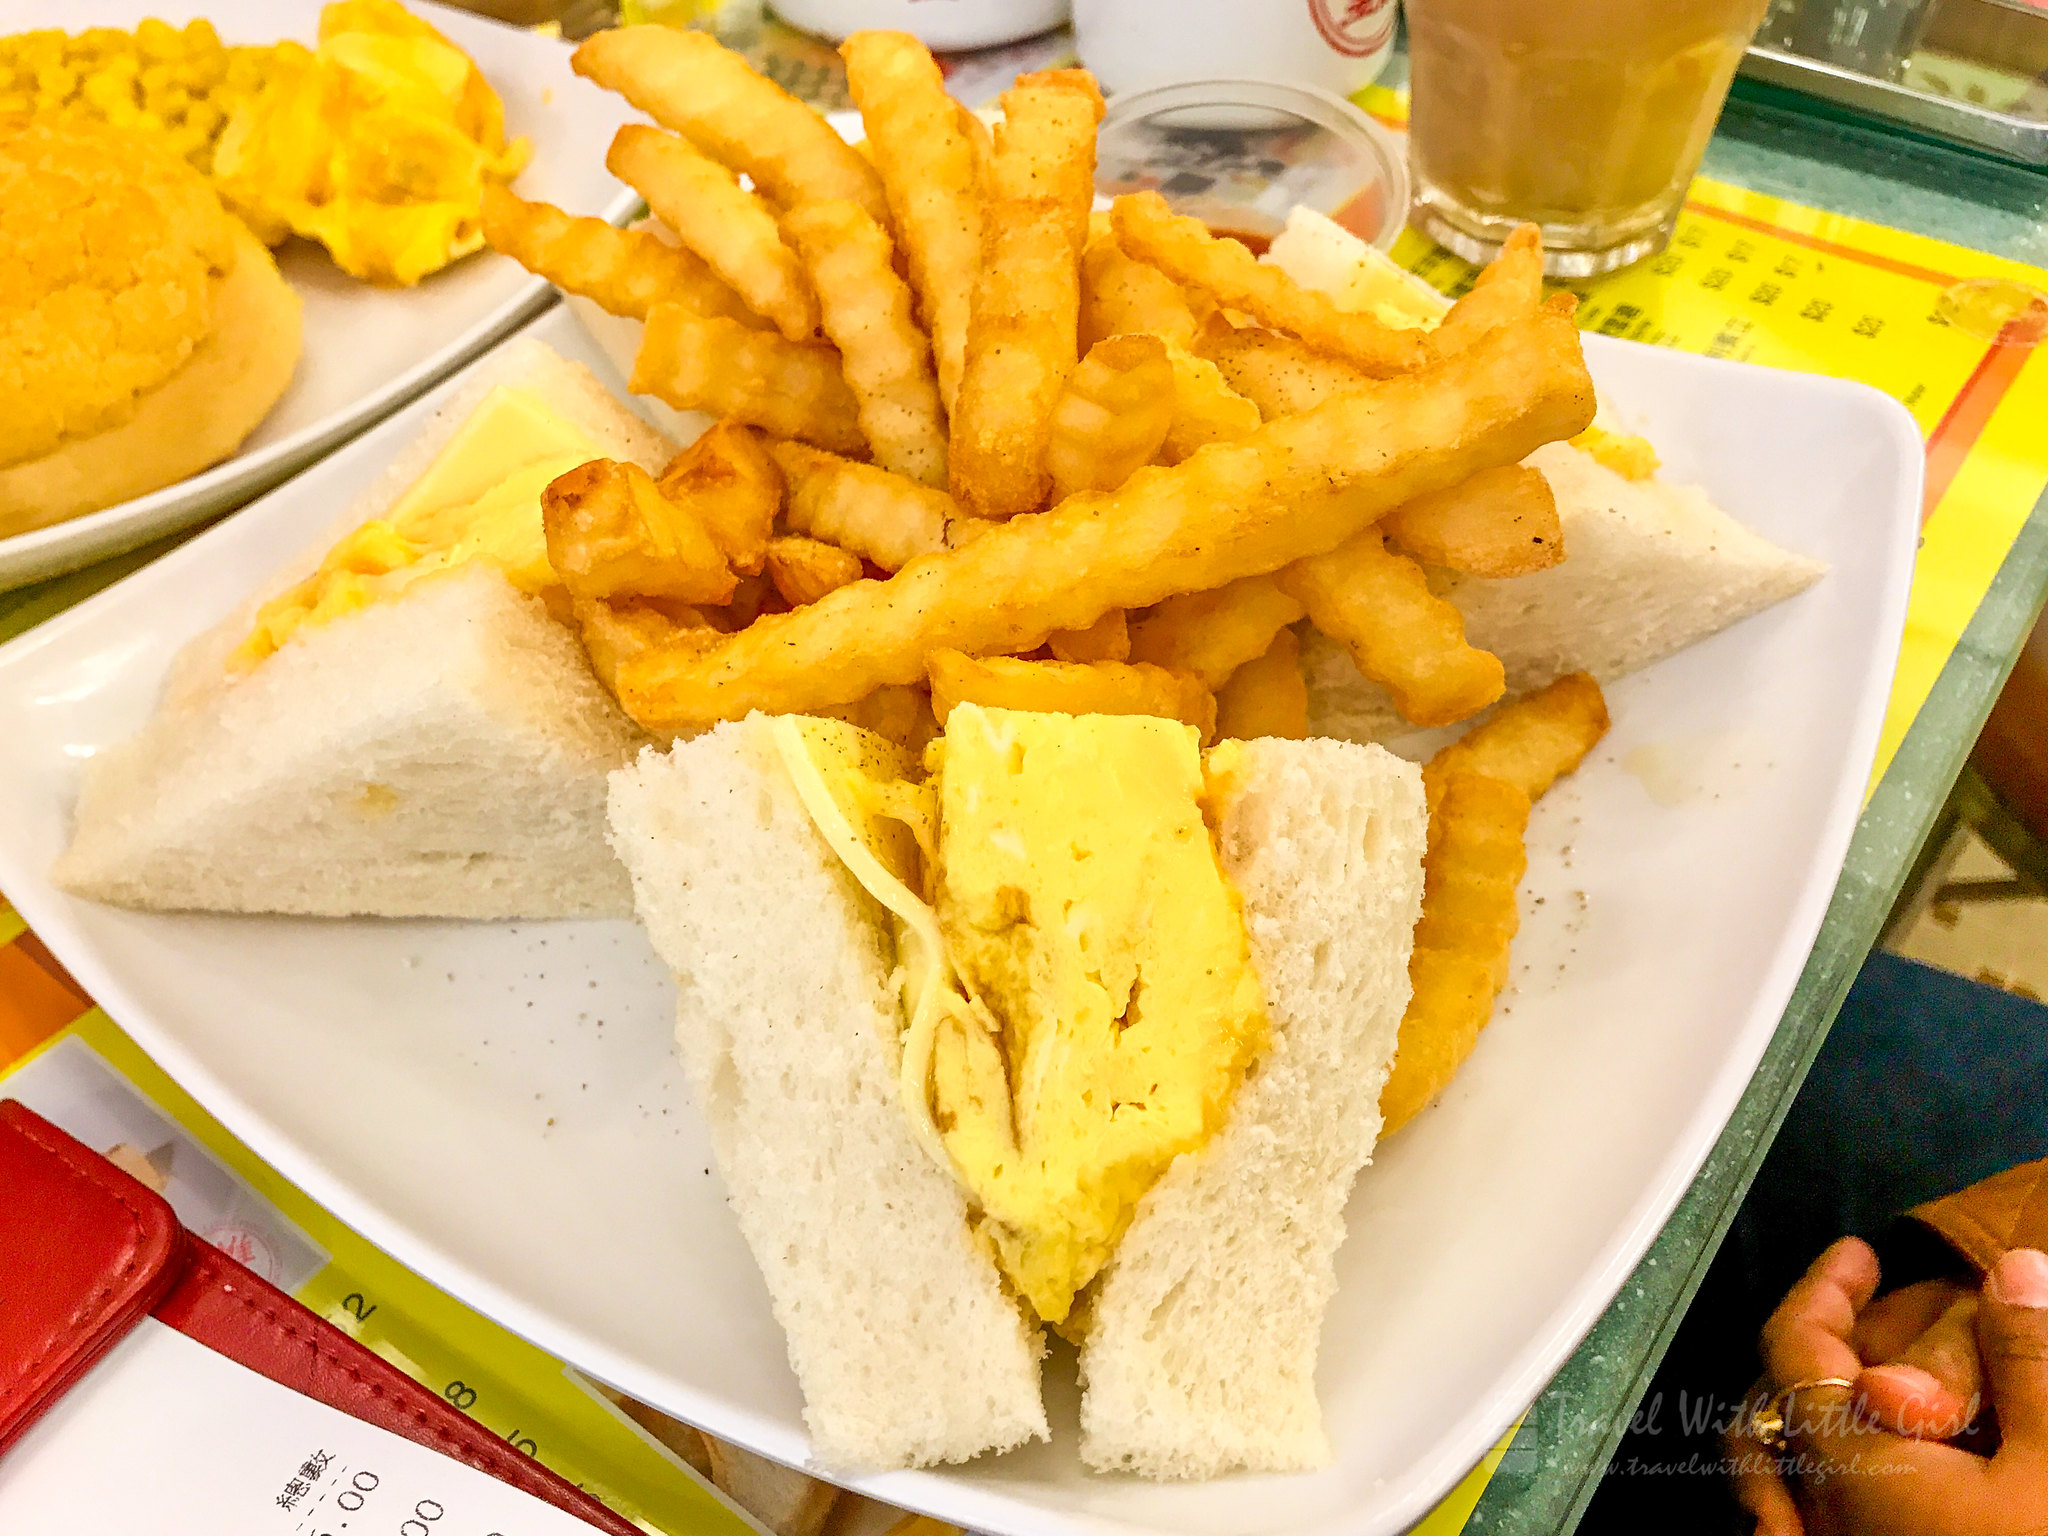 Lung Fung Cafe Cheese and Egg Sandwiches with French Fries